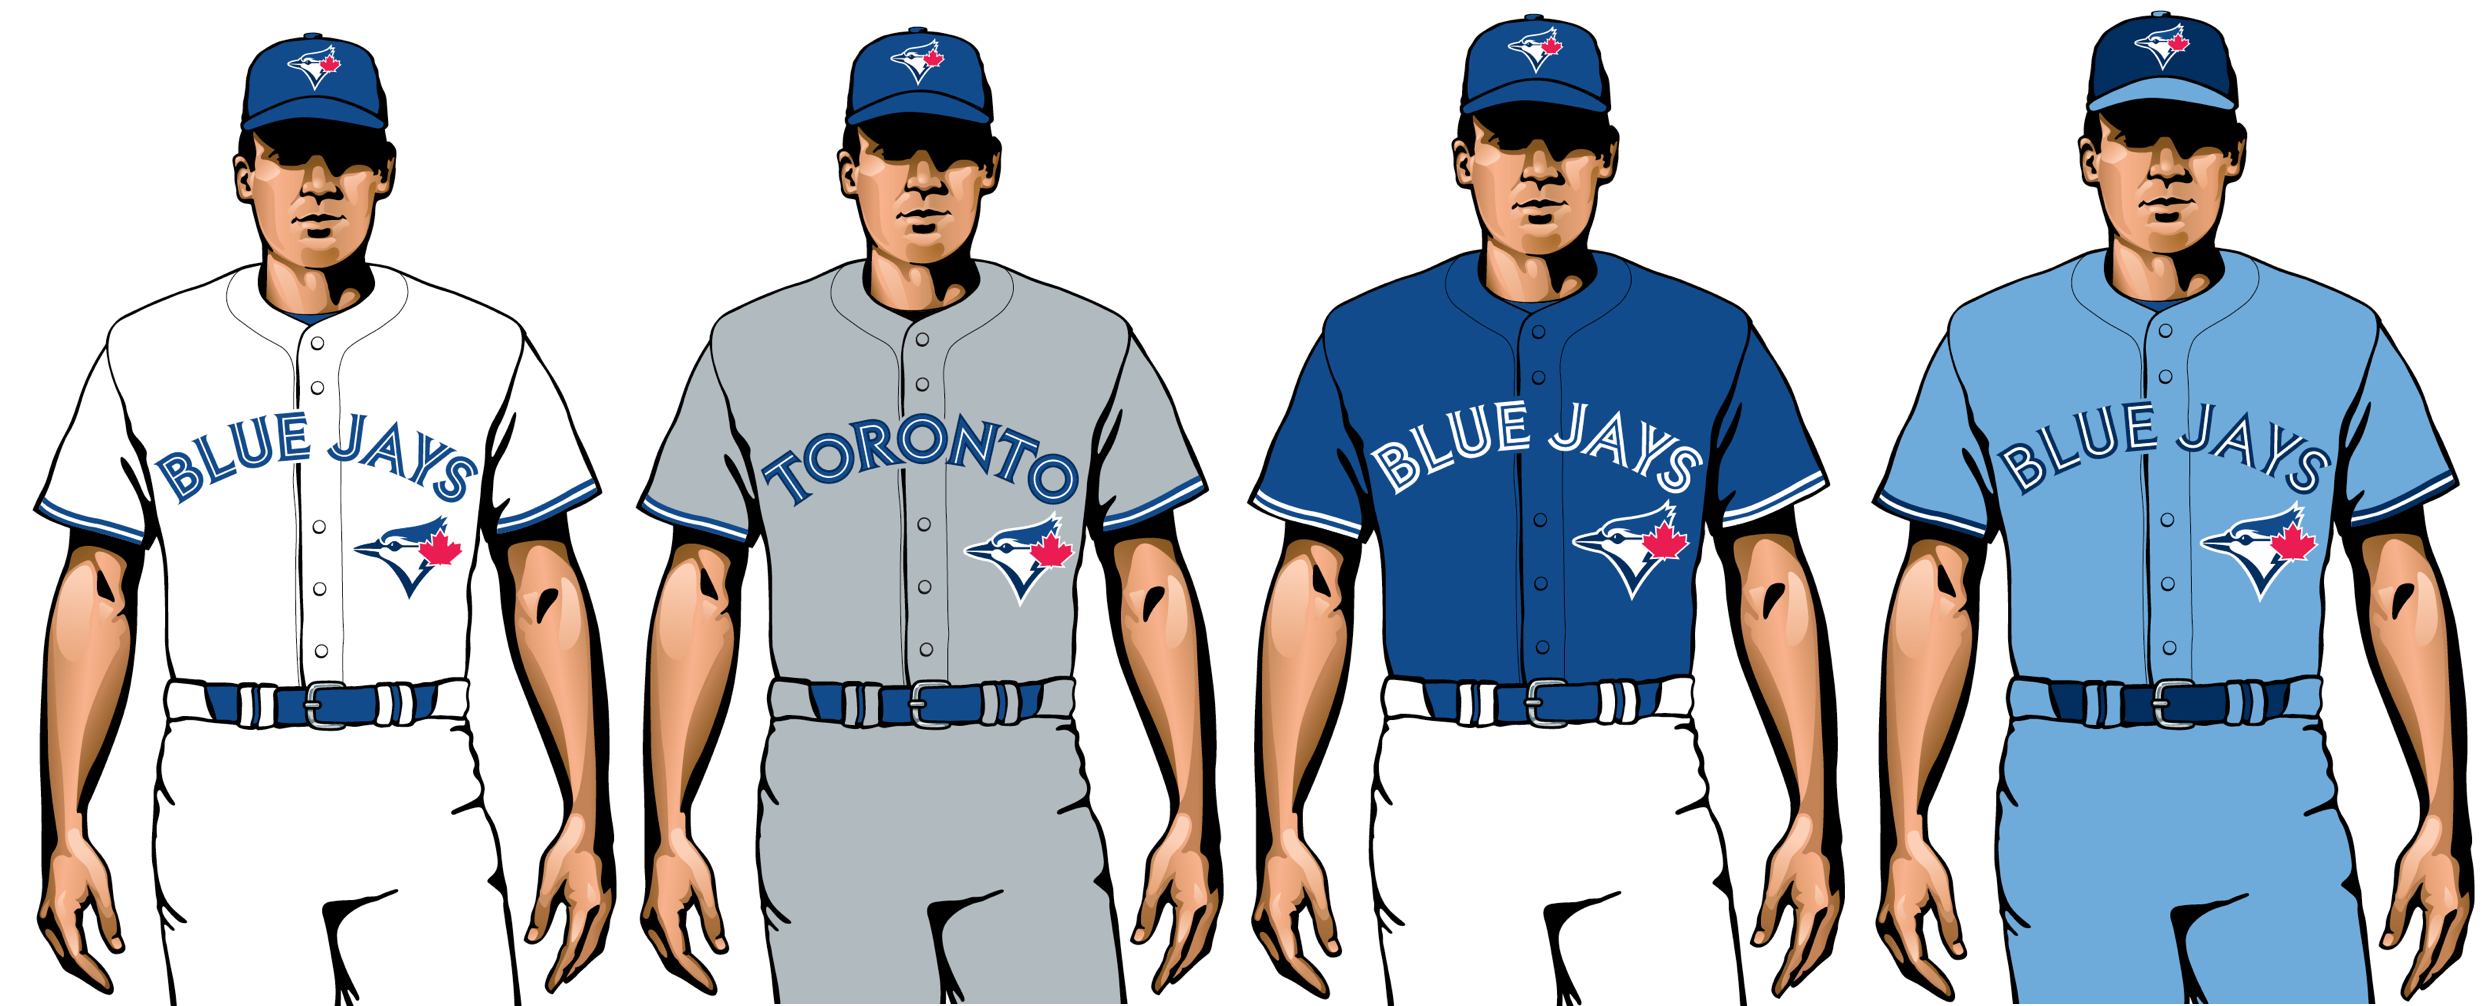 Ranking all 30 MLB uniforms for 2019